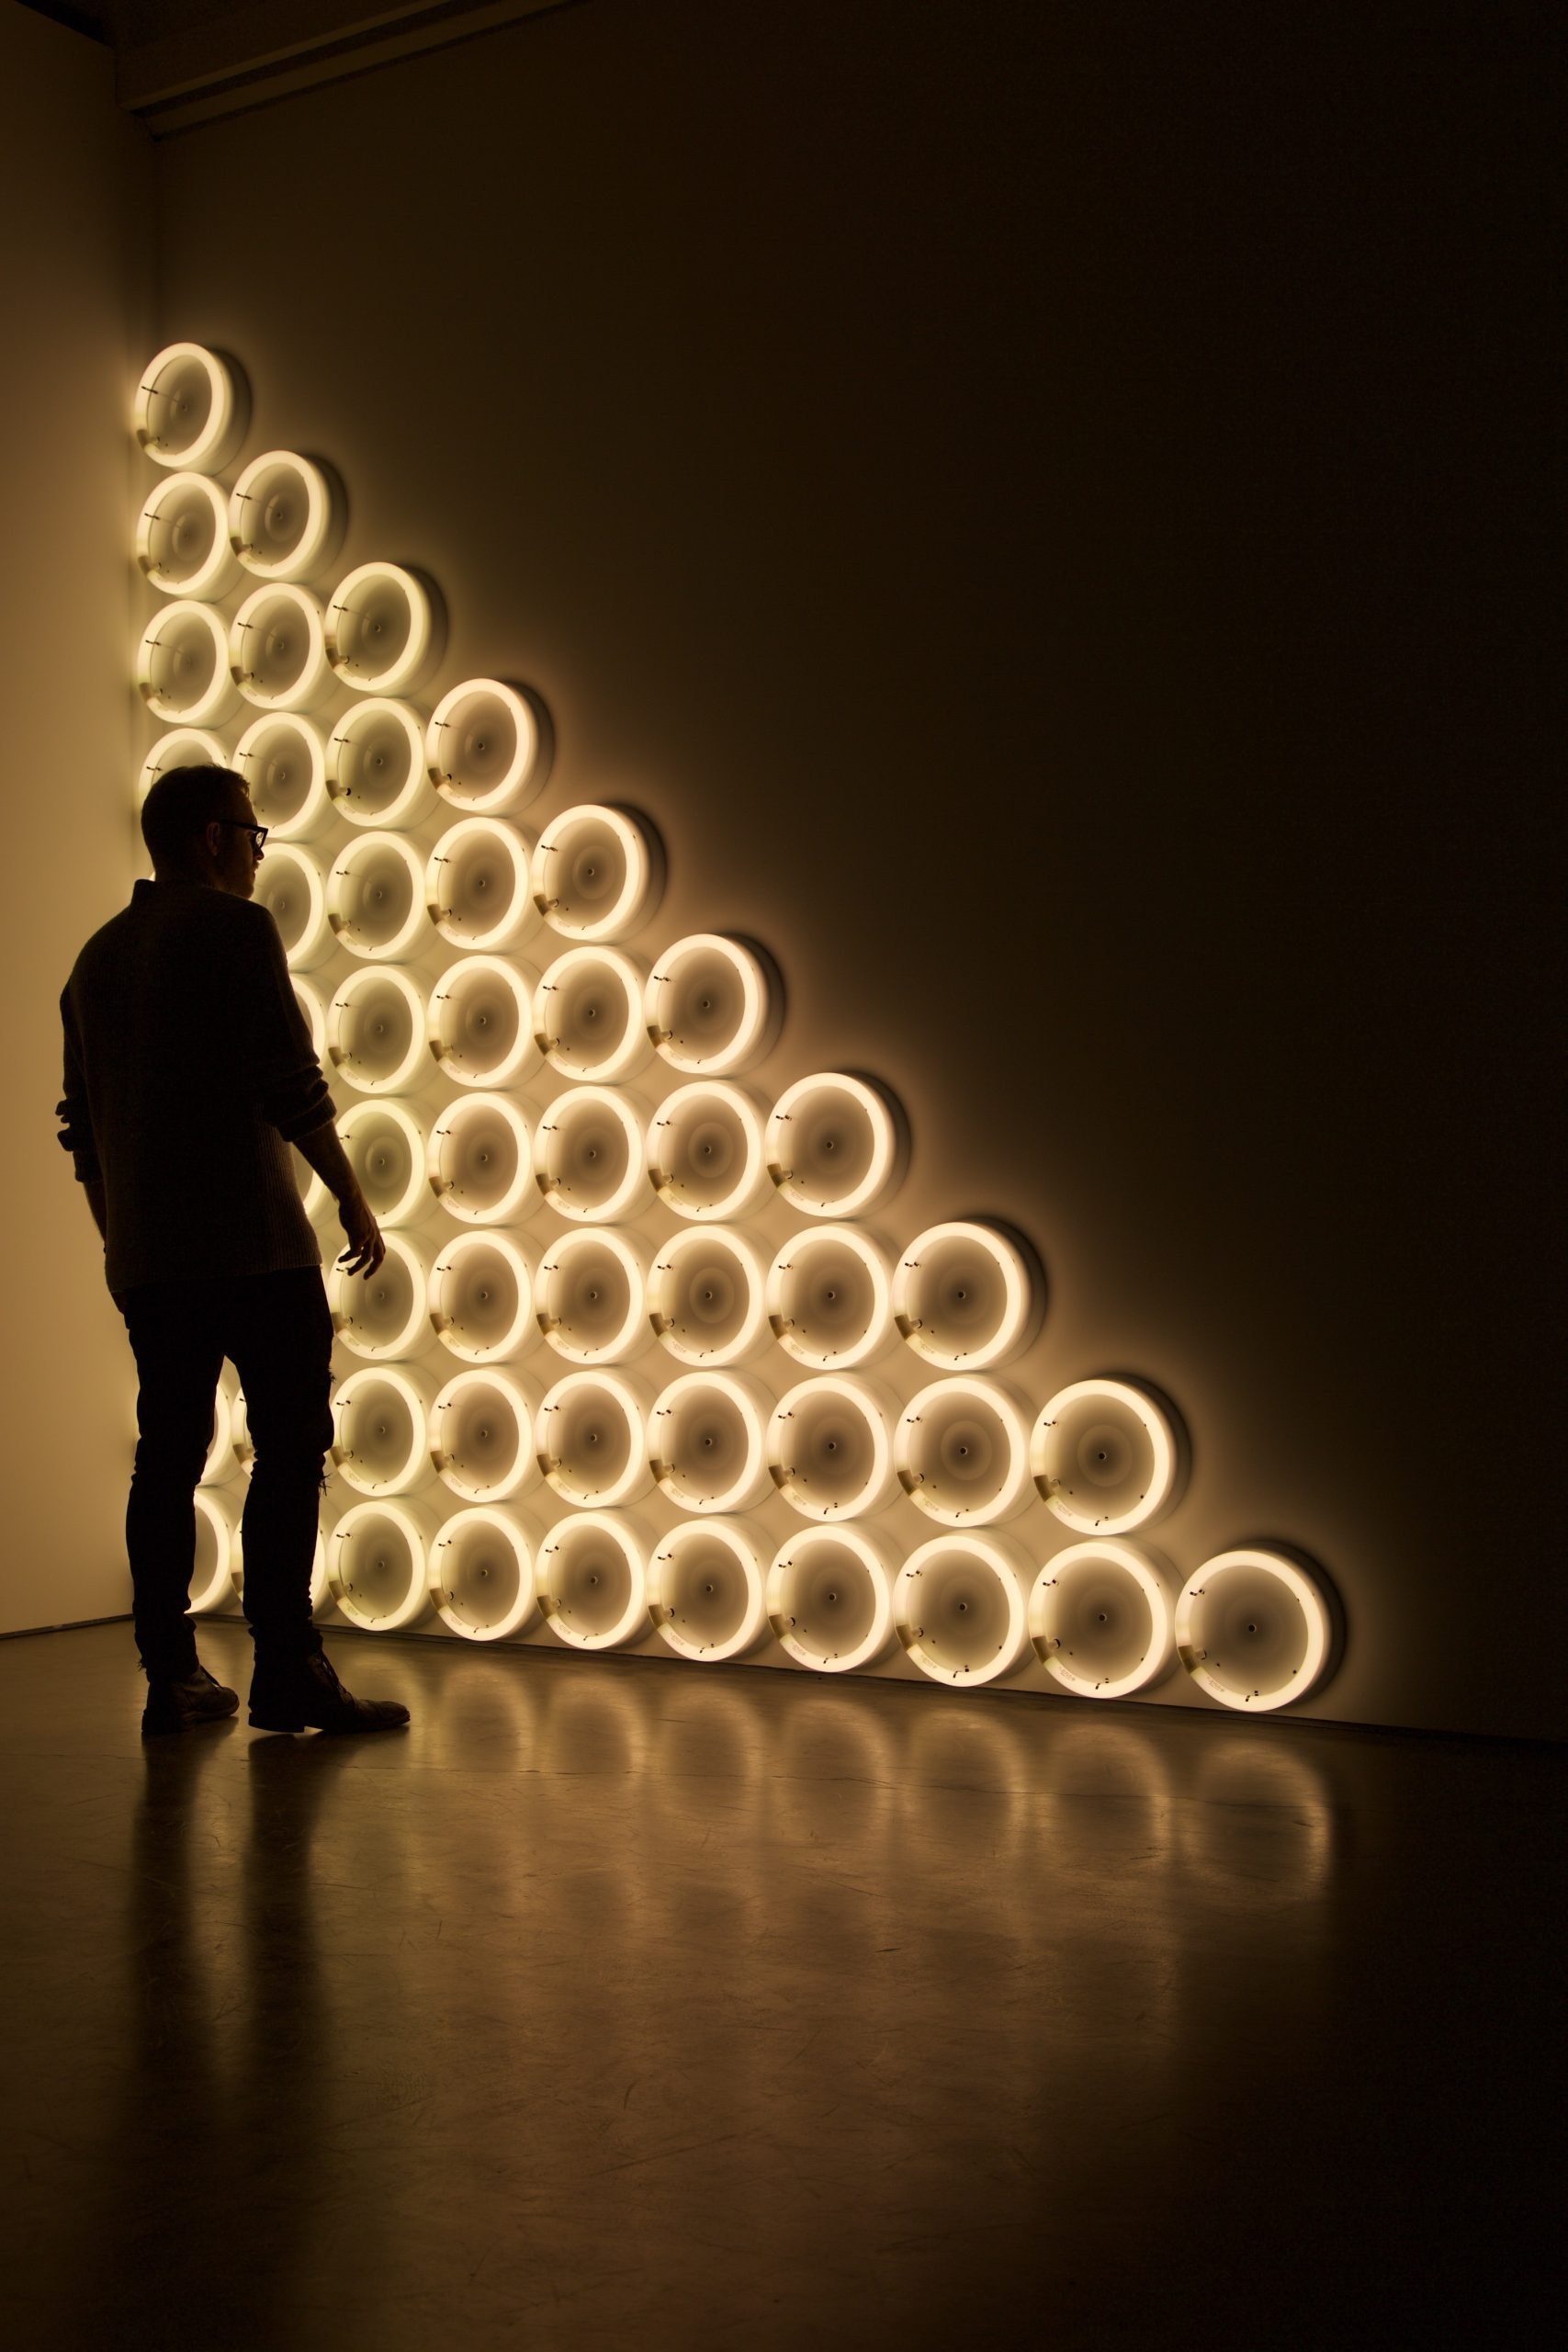 A man standing in front of a wall with stacked circular white lights